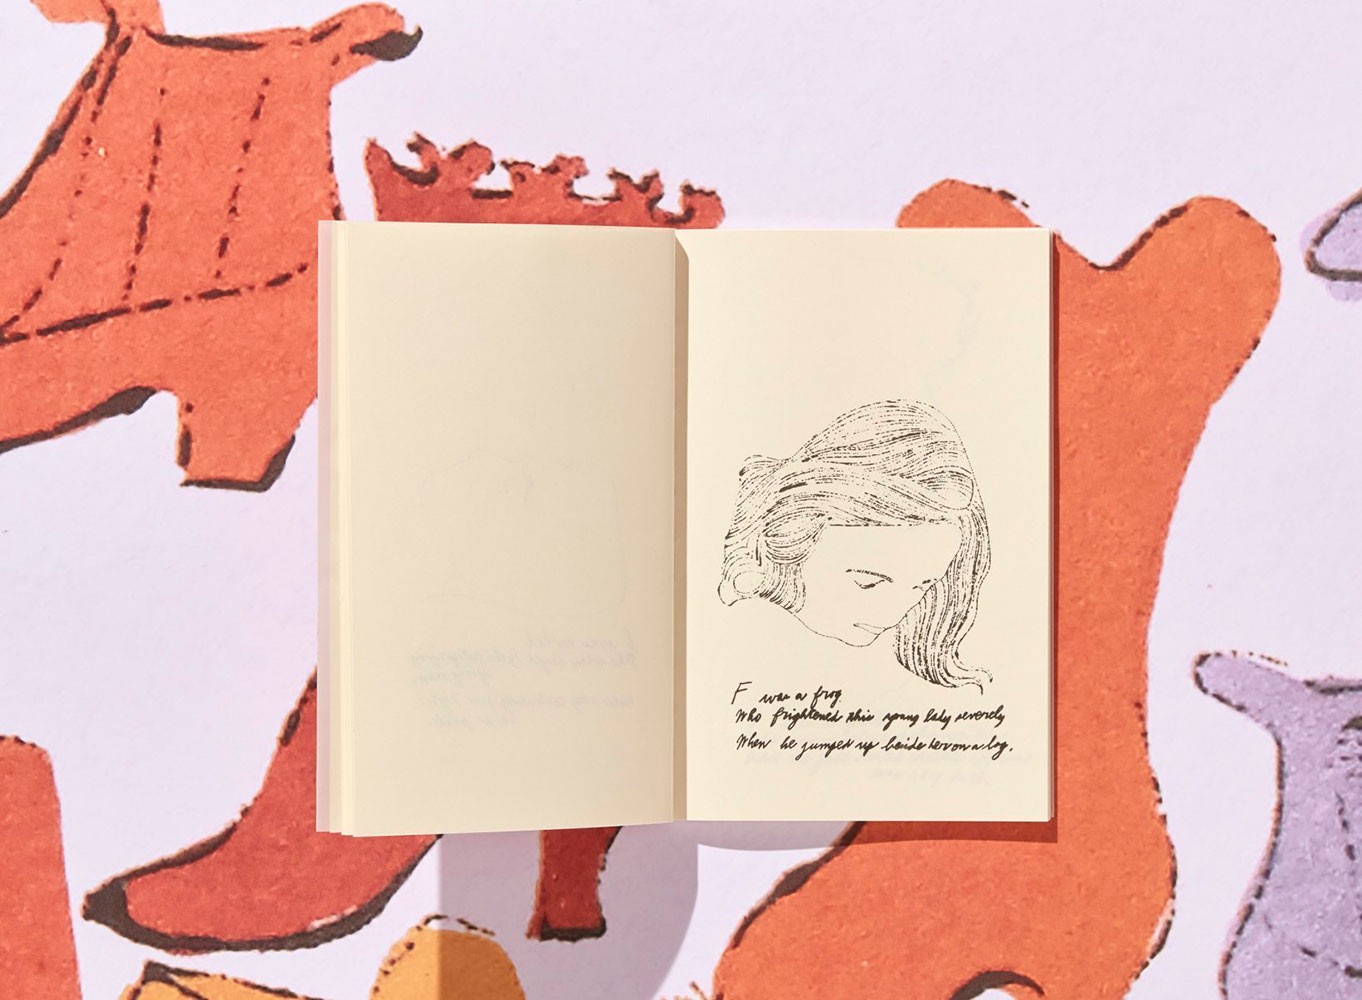 Andy Warhol:  Seven Illustrated Books 1952 – 1959